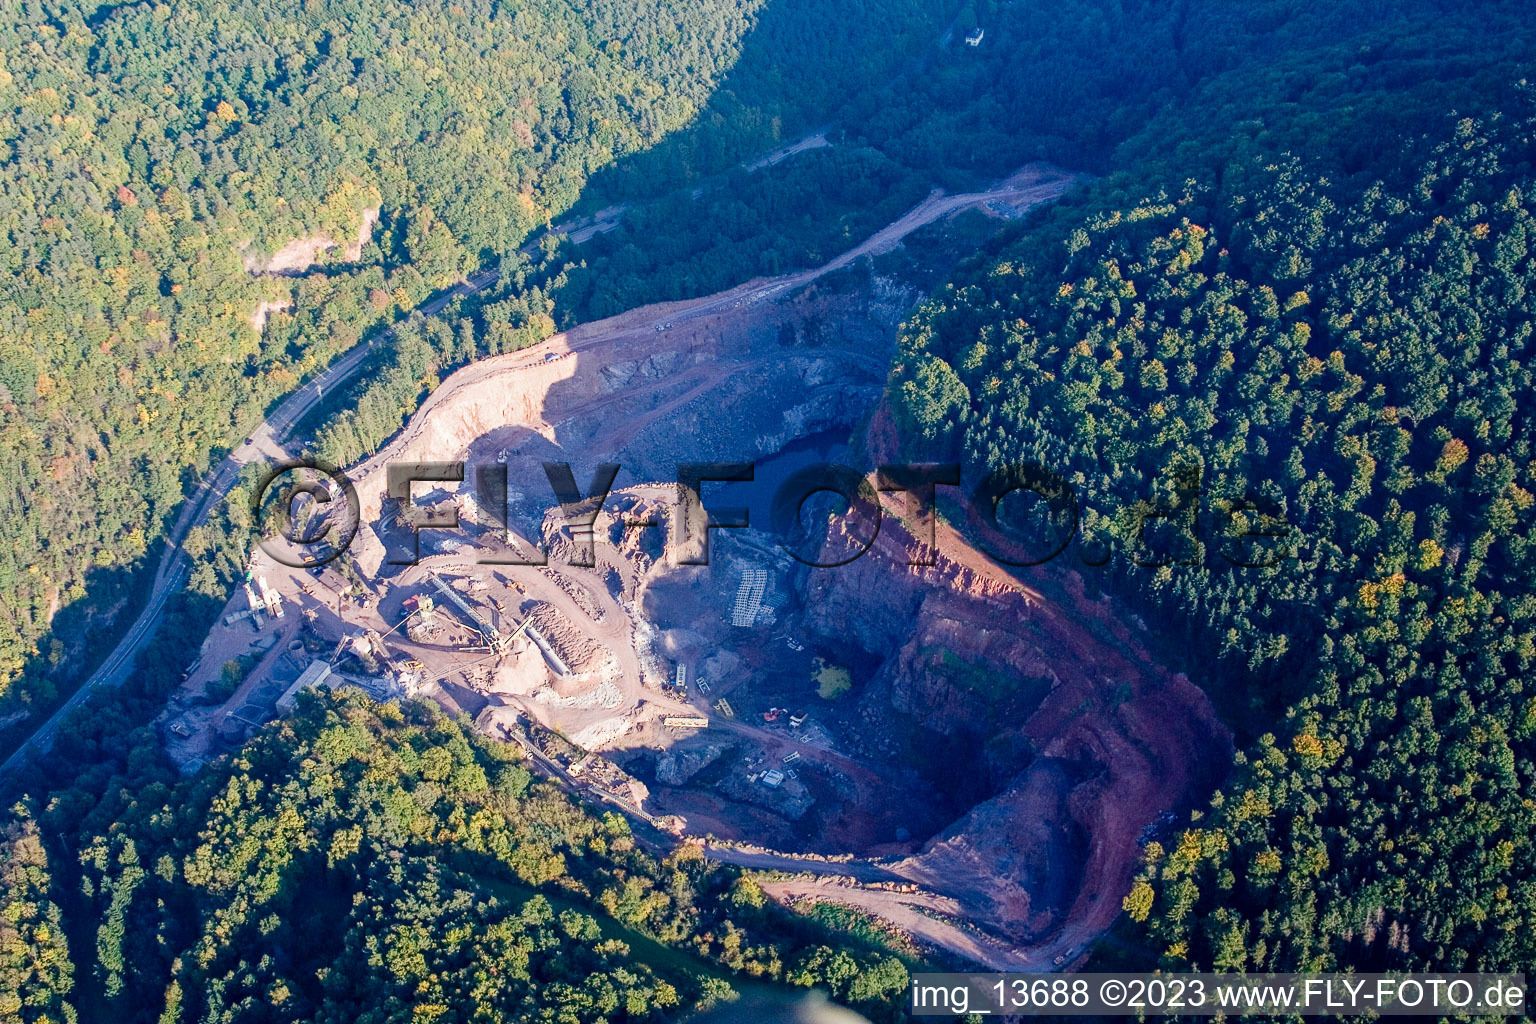 Quarry in Waldhambach in the state Rhineland-Palatinate, Germany from above